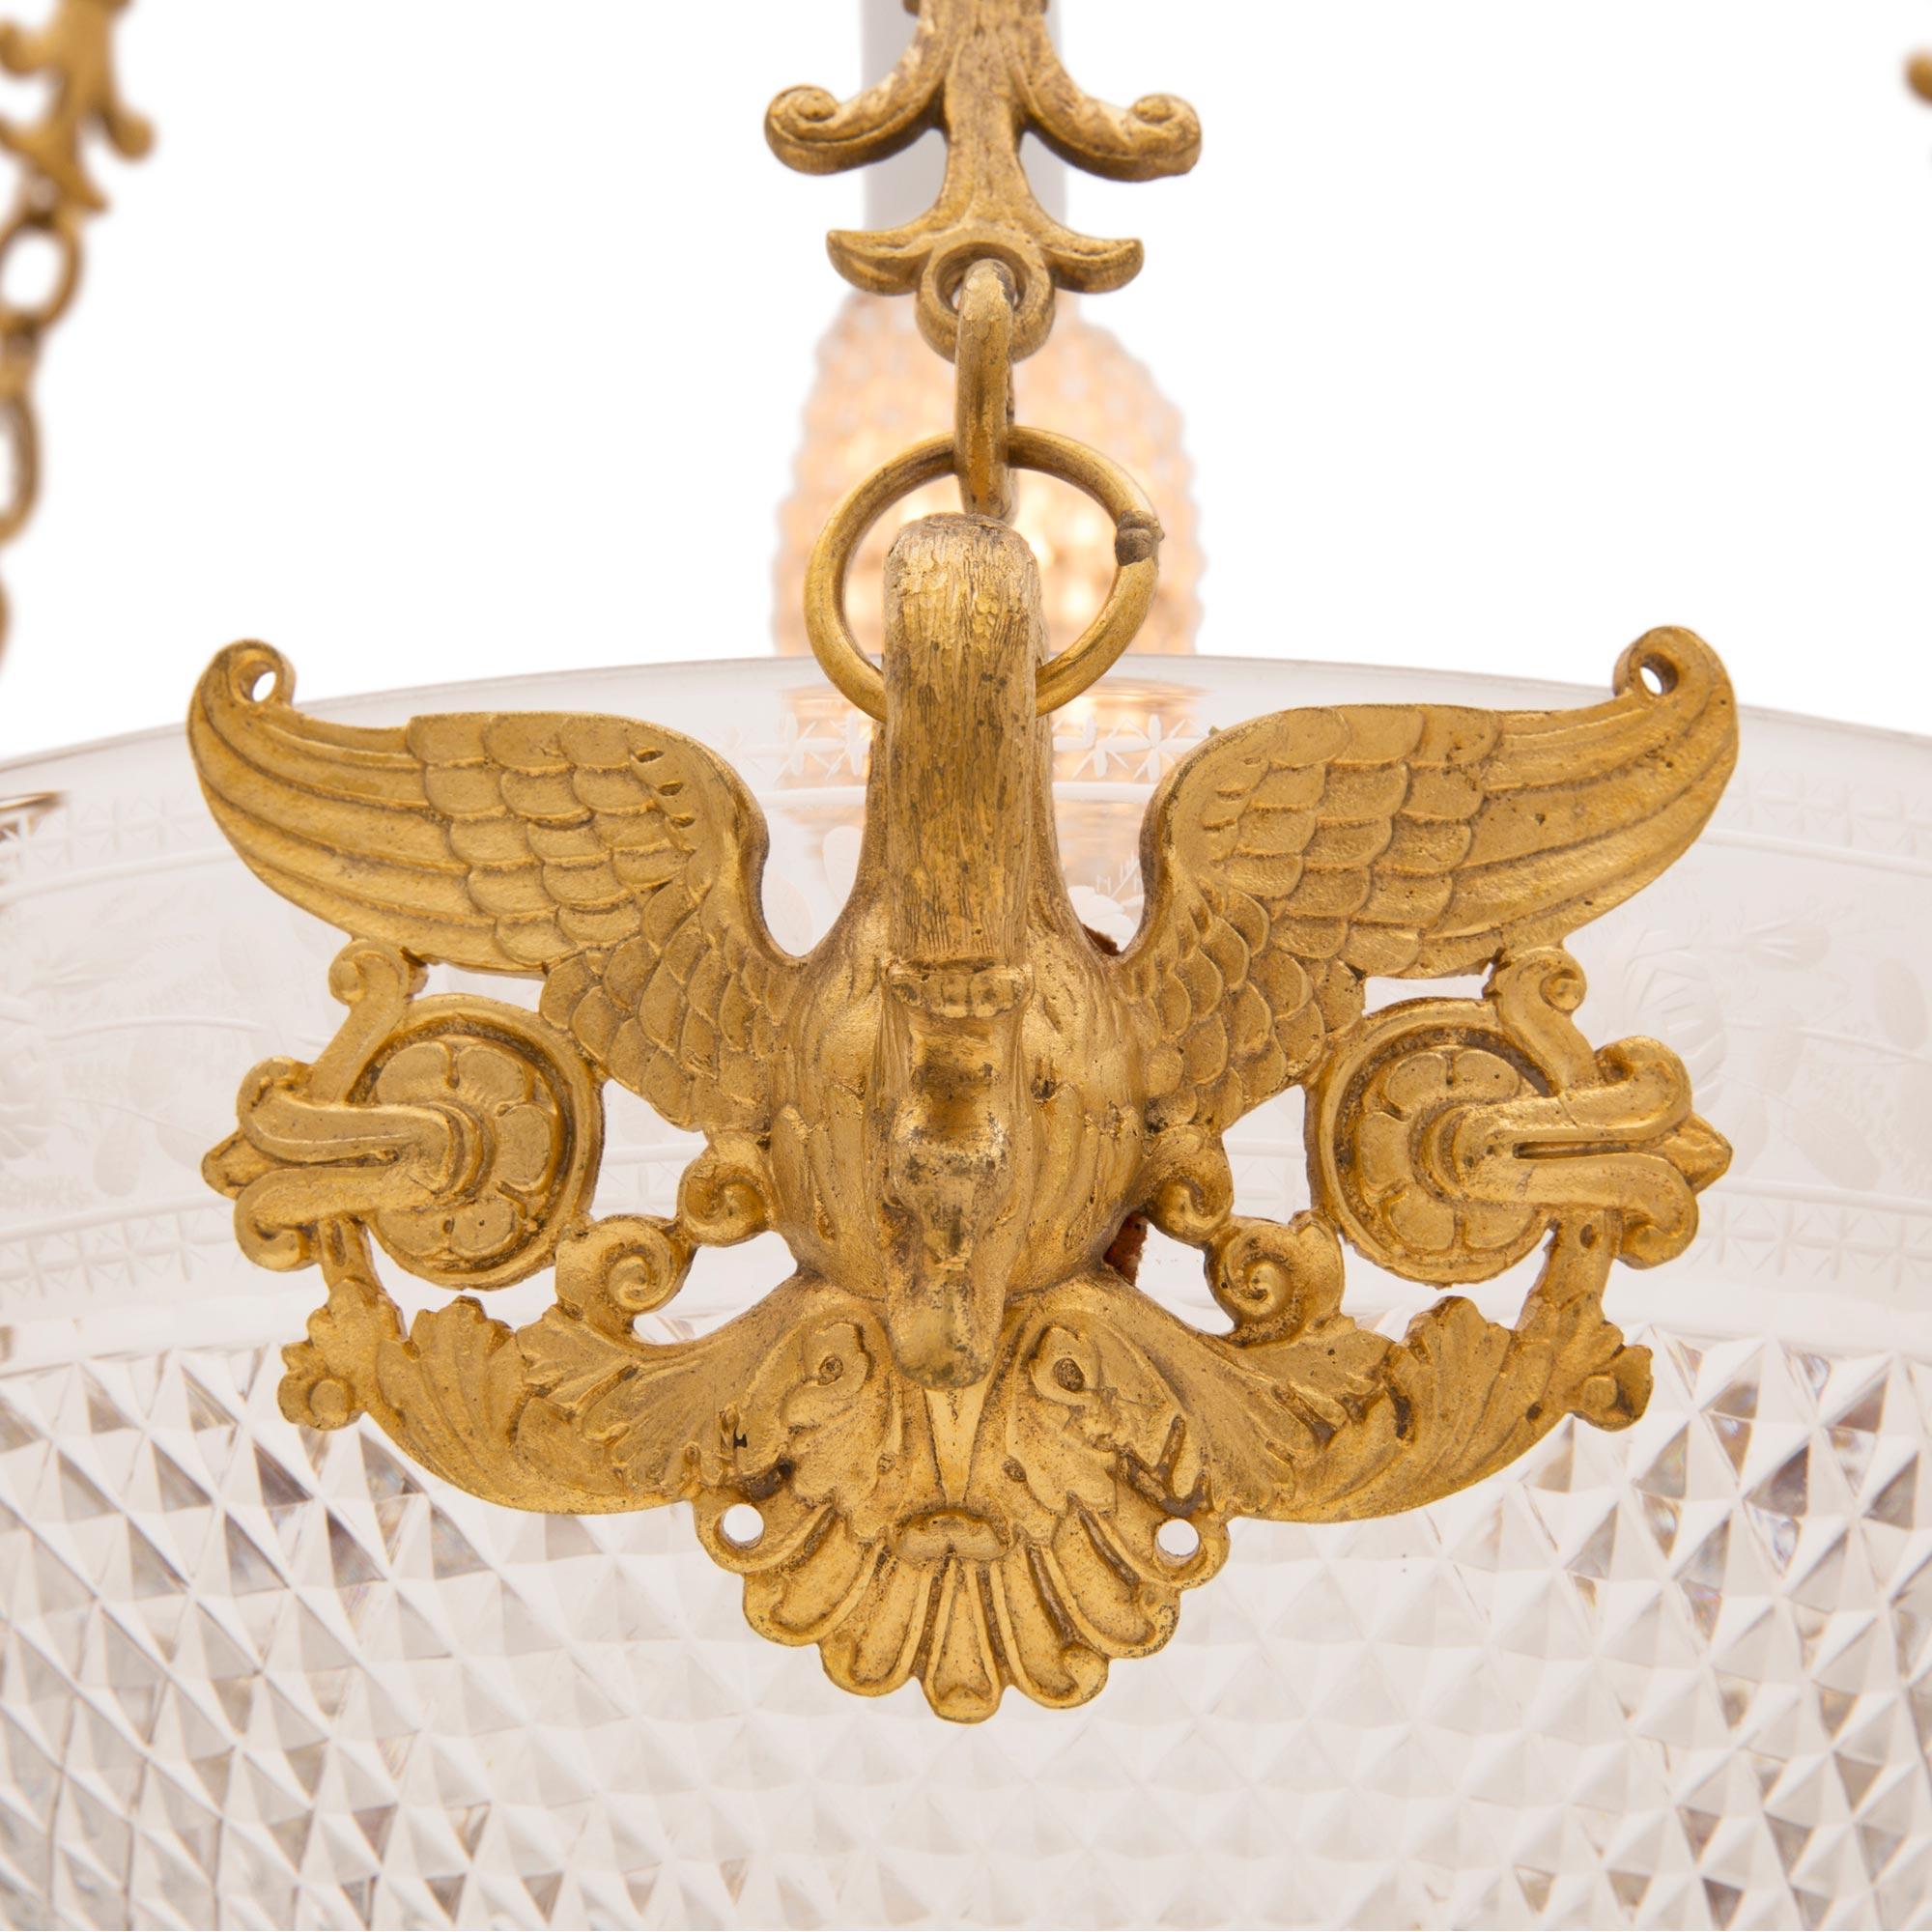 French Early 19th Century 1st Empire Period Baccarat Crystal & Ormolu Chandelier For Sale 3